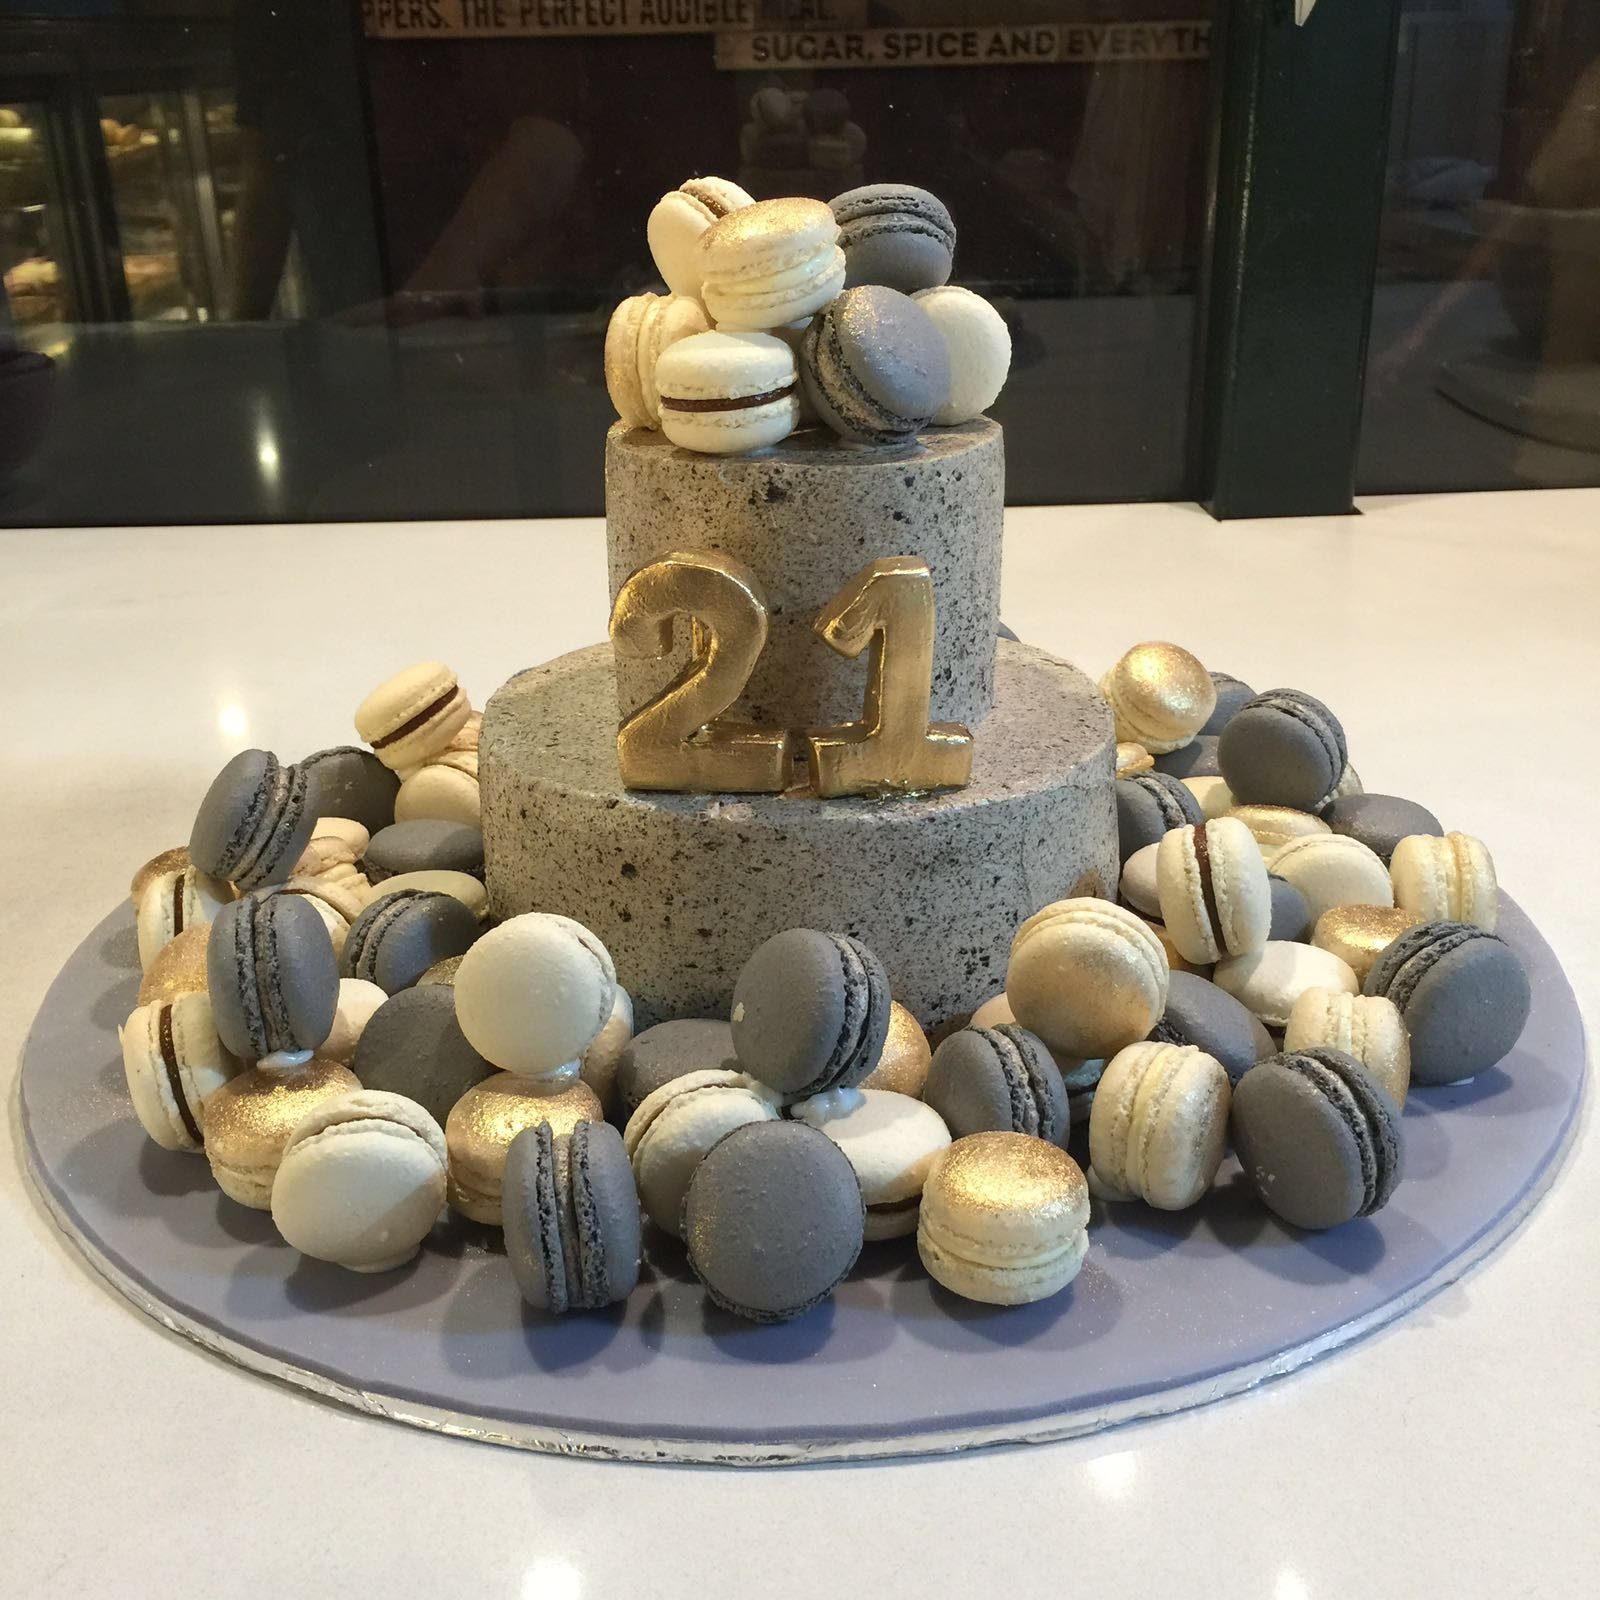 A luxe looking birthday cake. Made by: Bonheur Patisserie Singapore - Recommend.sg